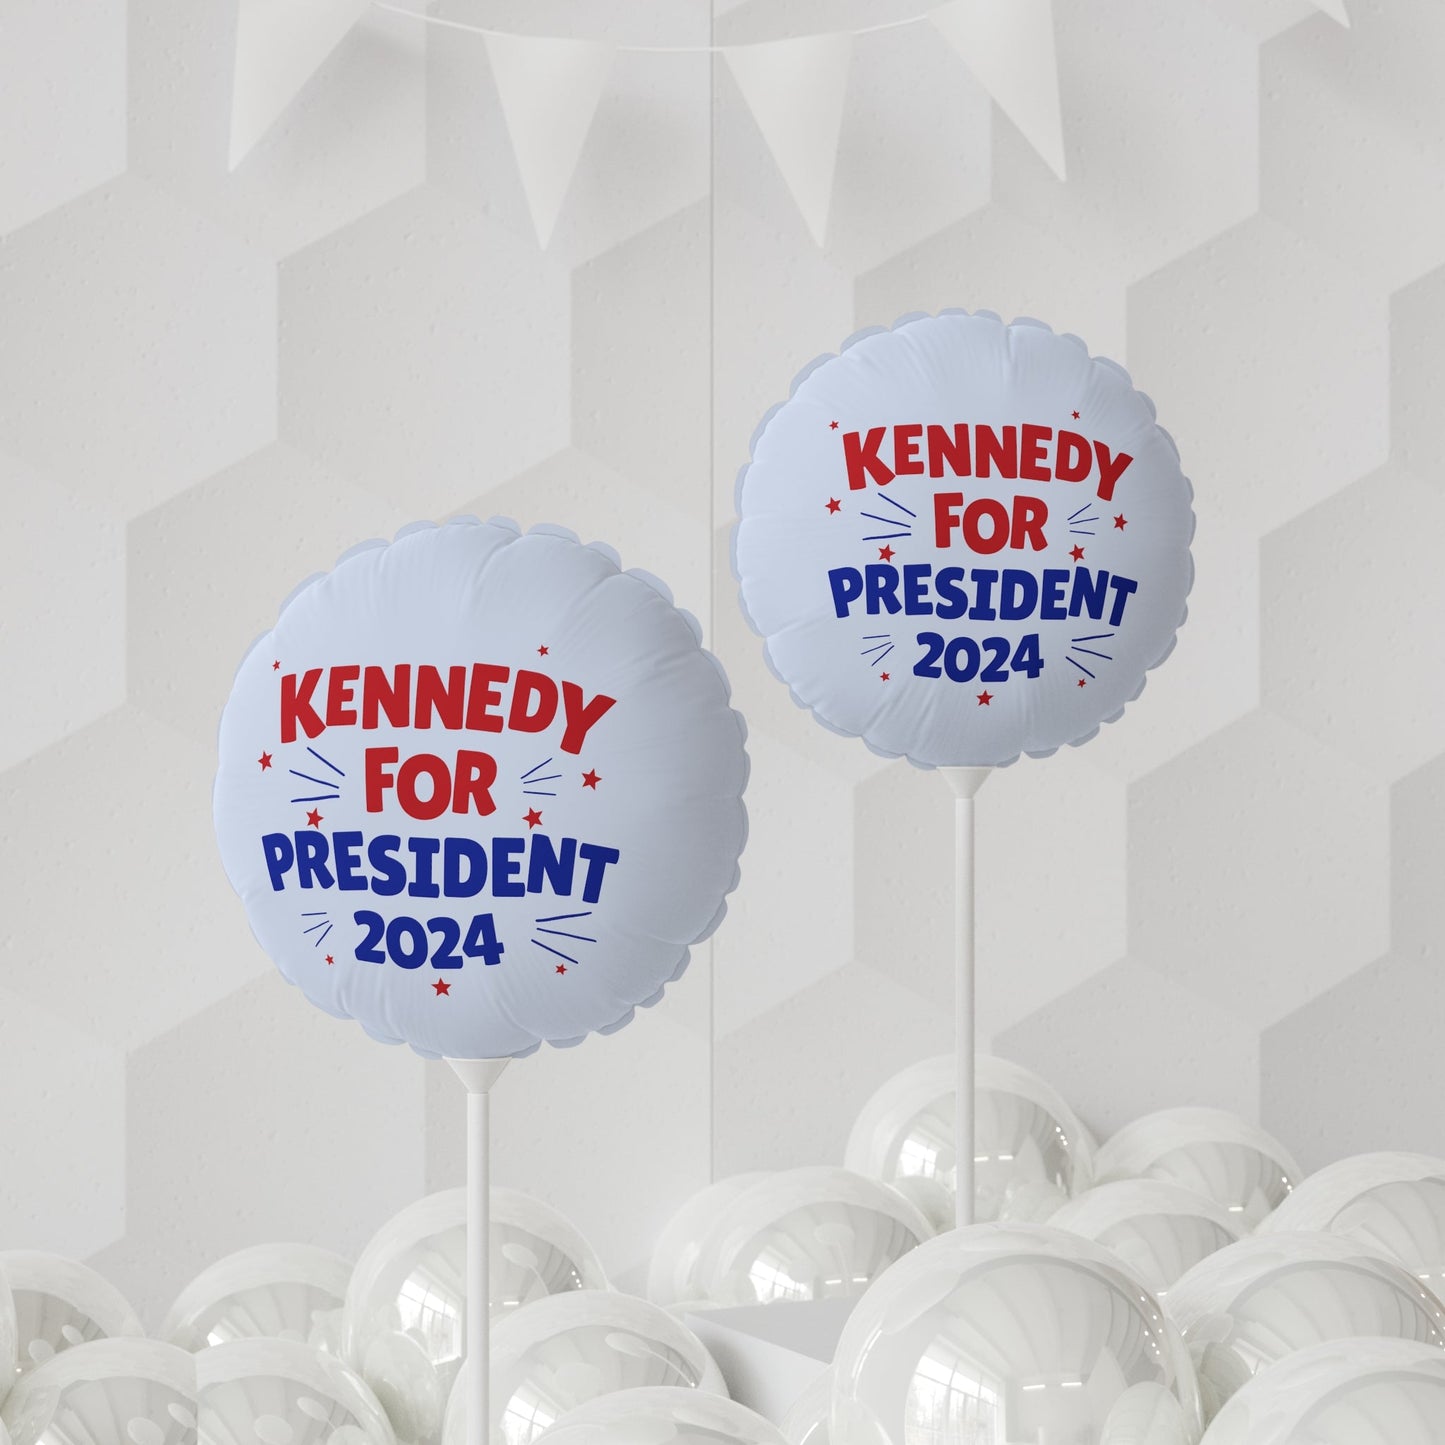 Kennedy for President Balloon 11" - TEAM KENNEDY. All rights reserved